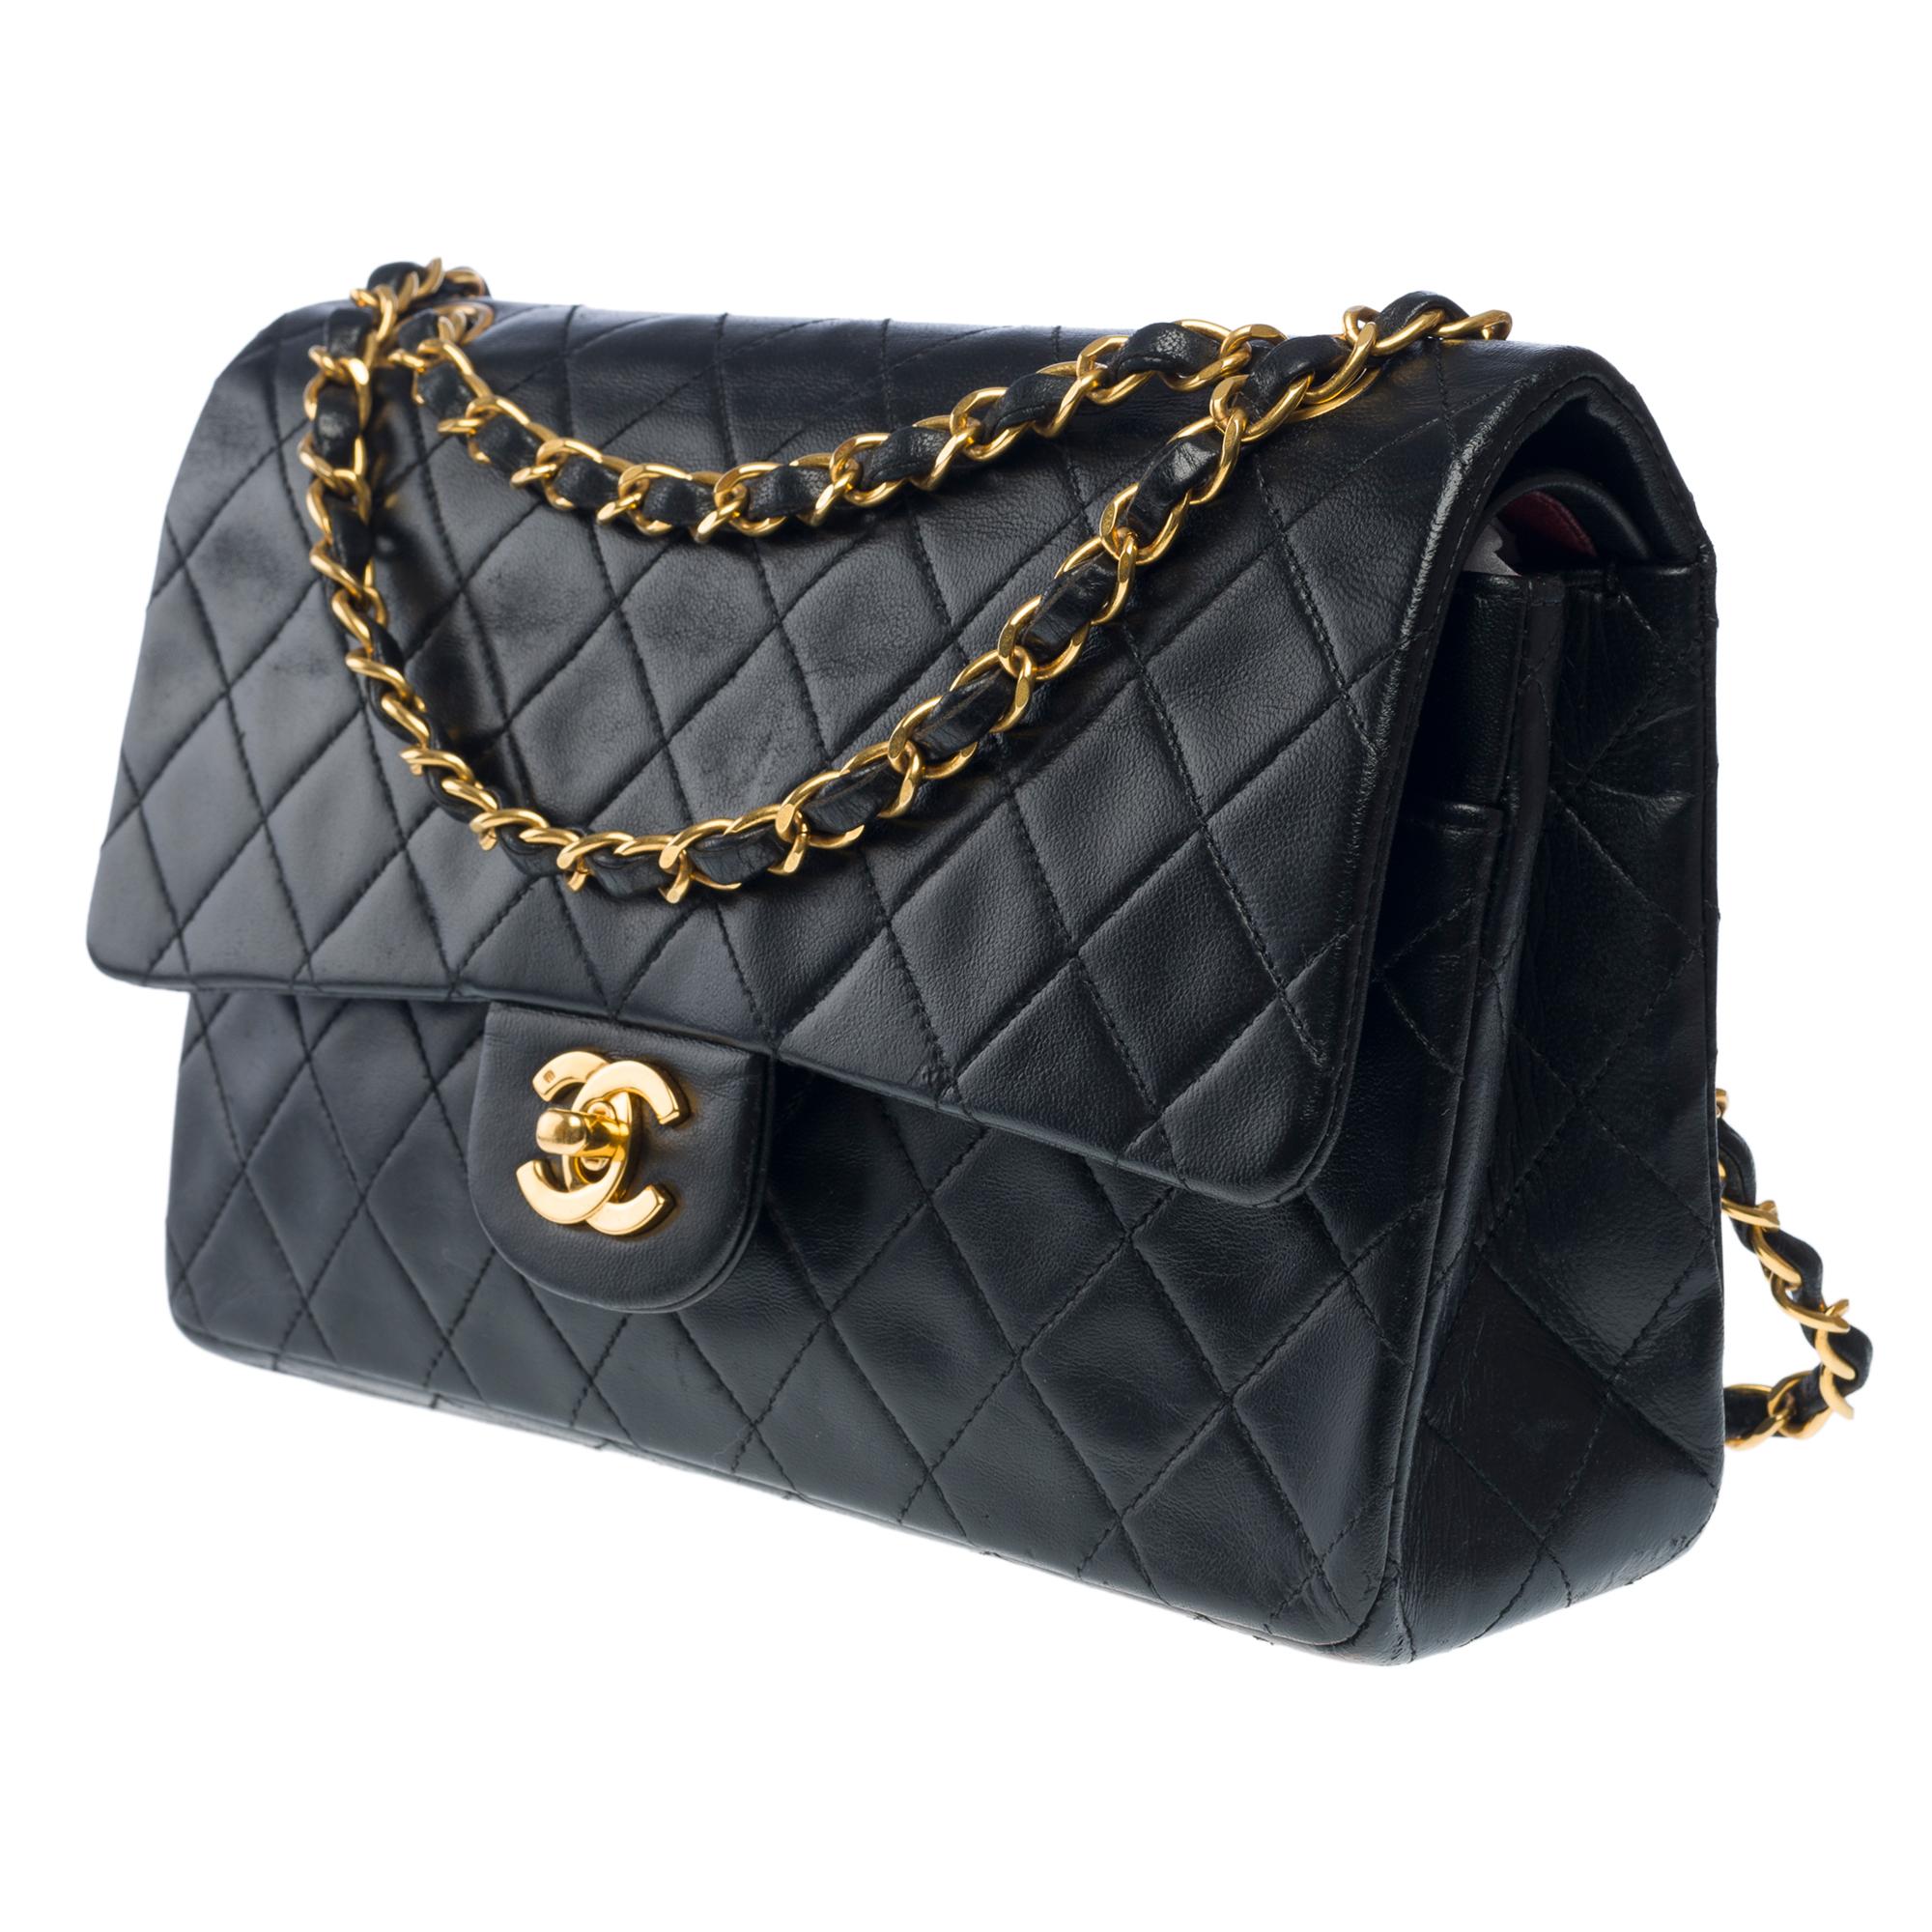 Women's Chanel Timeless double flap shoulder bag in black quilted lambskin leather, GHW For Sale